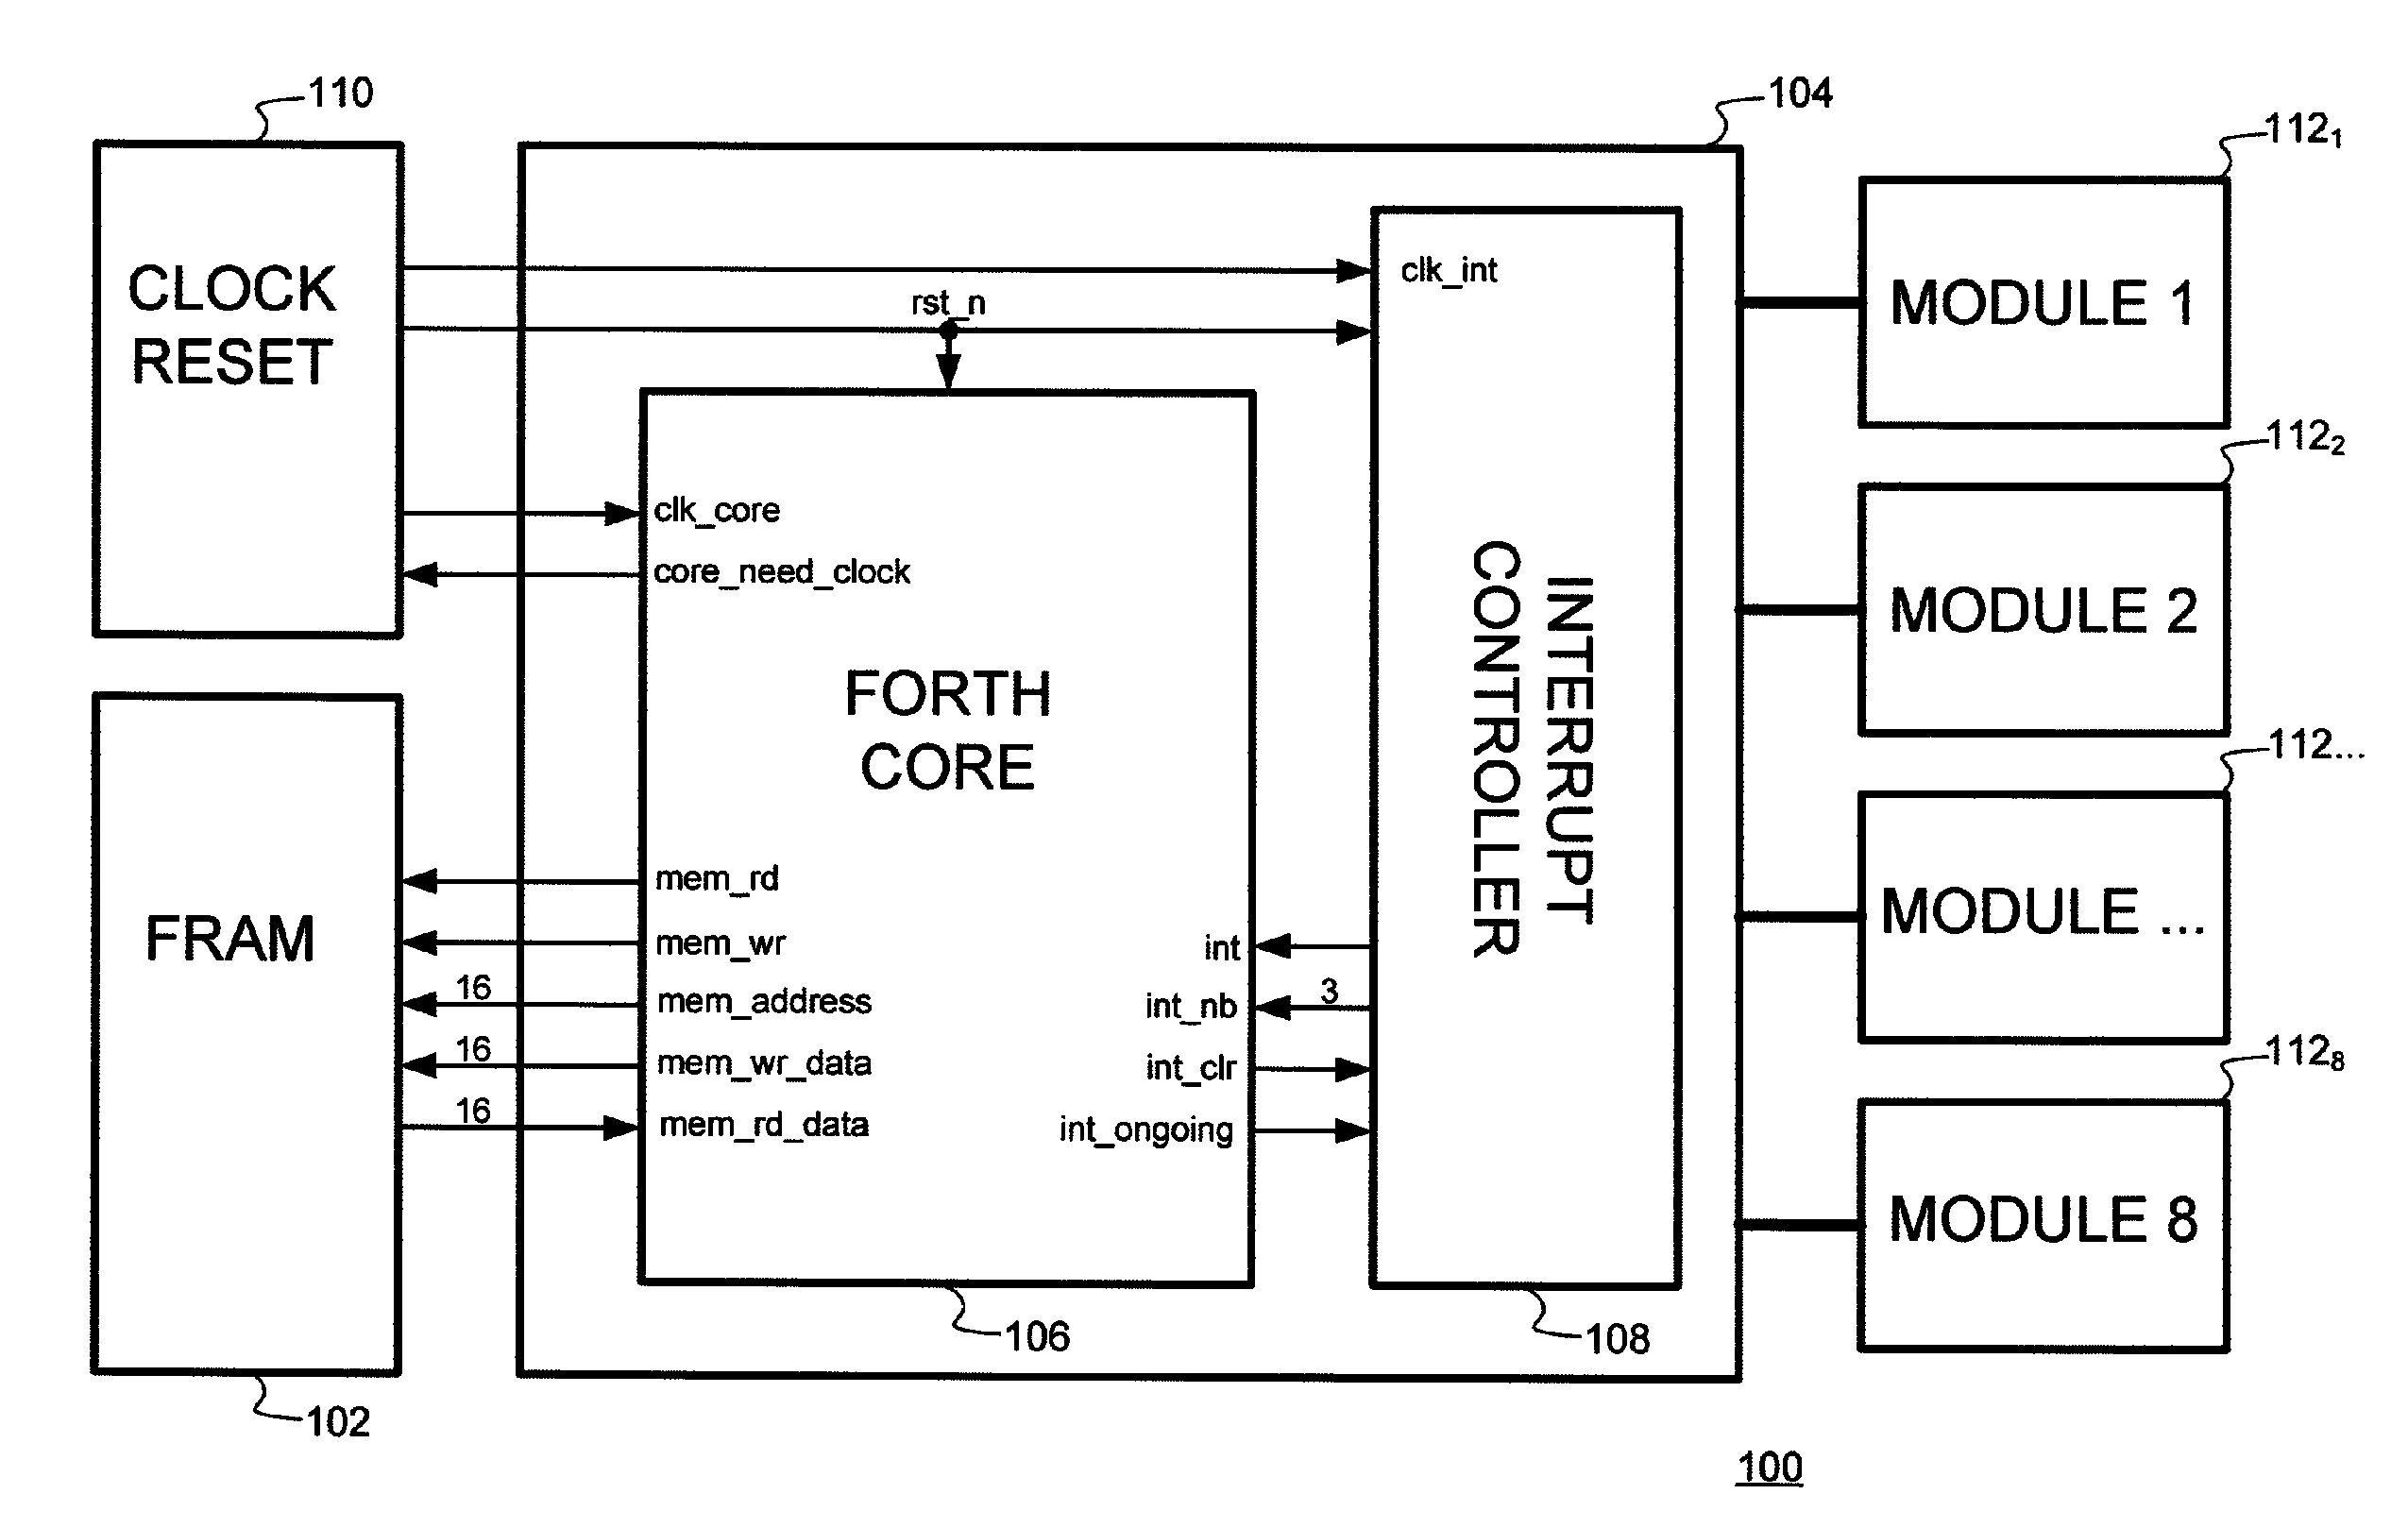 Stack processor using a ferroelectric random access memory (F-RAM) for both code and data space